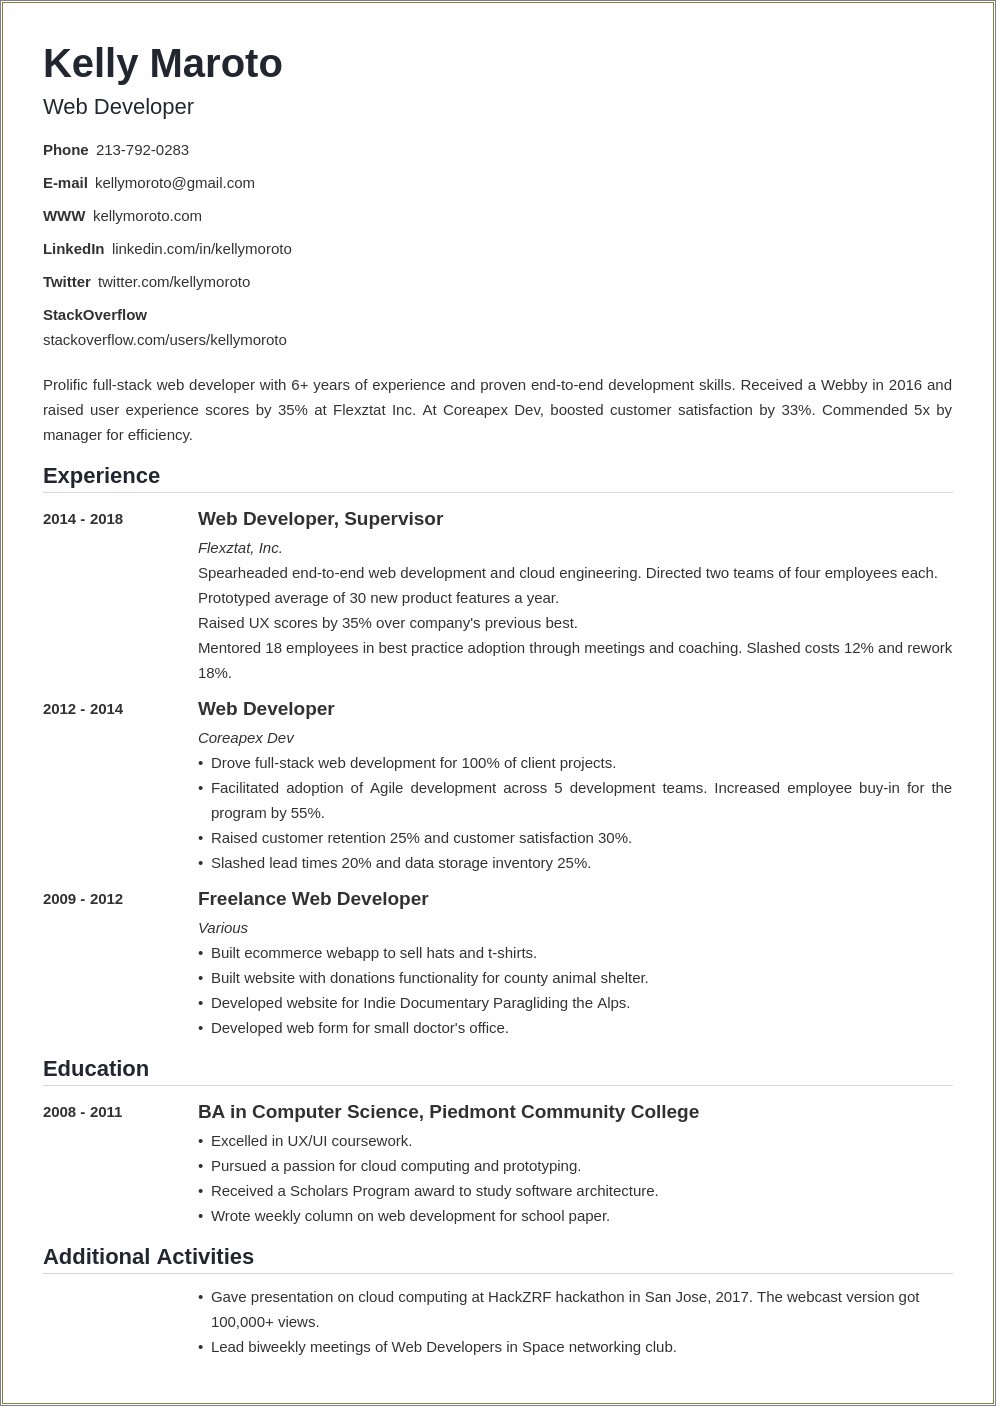 Web Developer Resume With No Work Experience